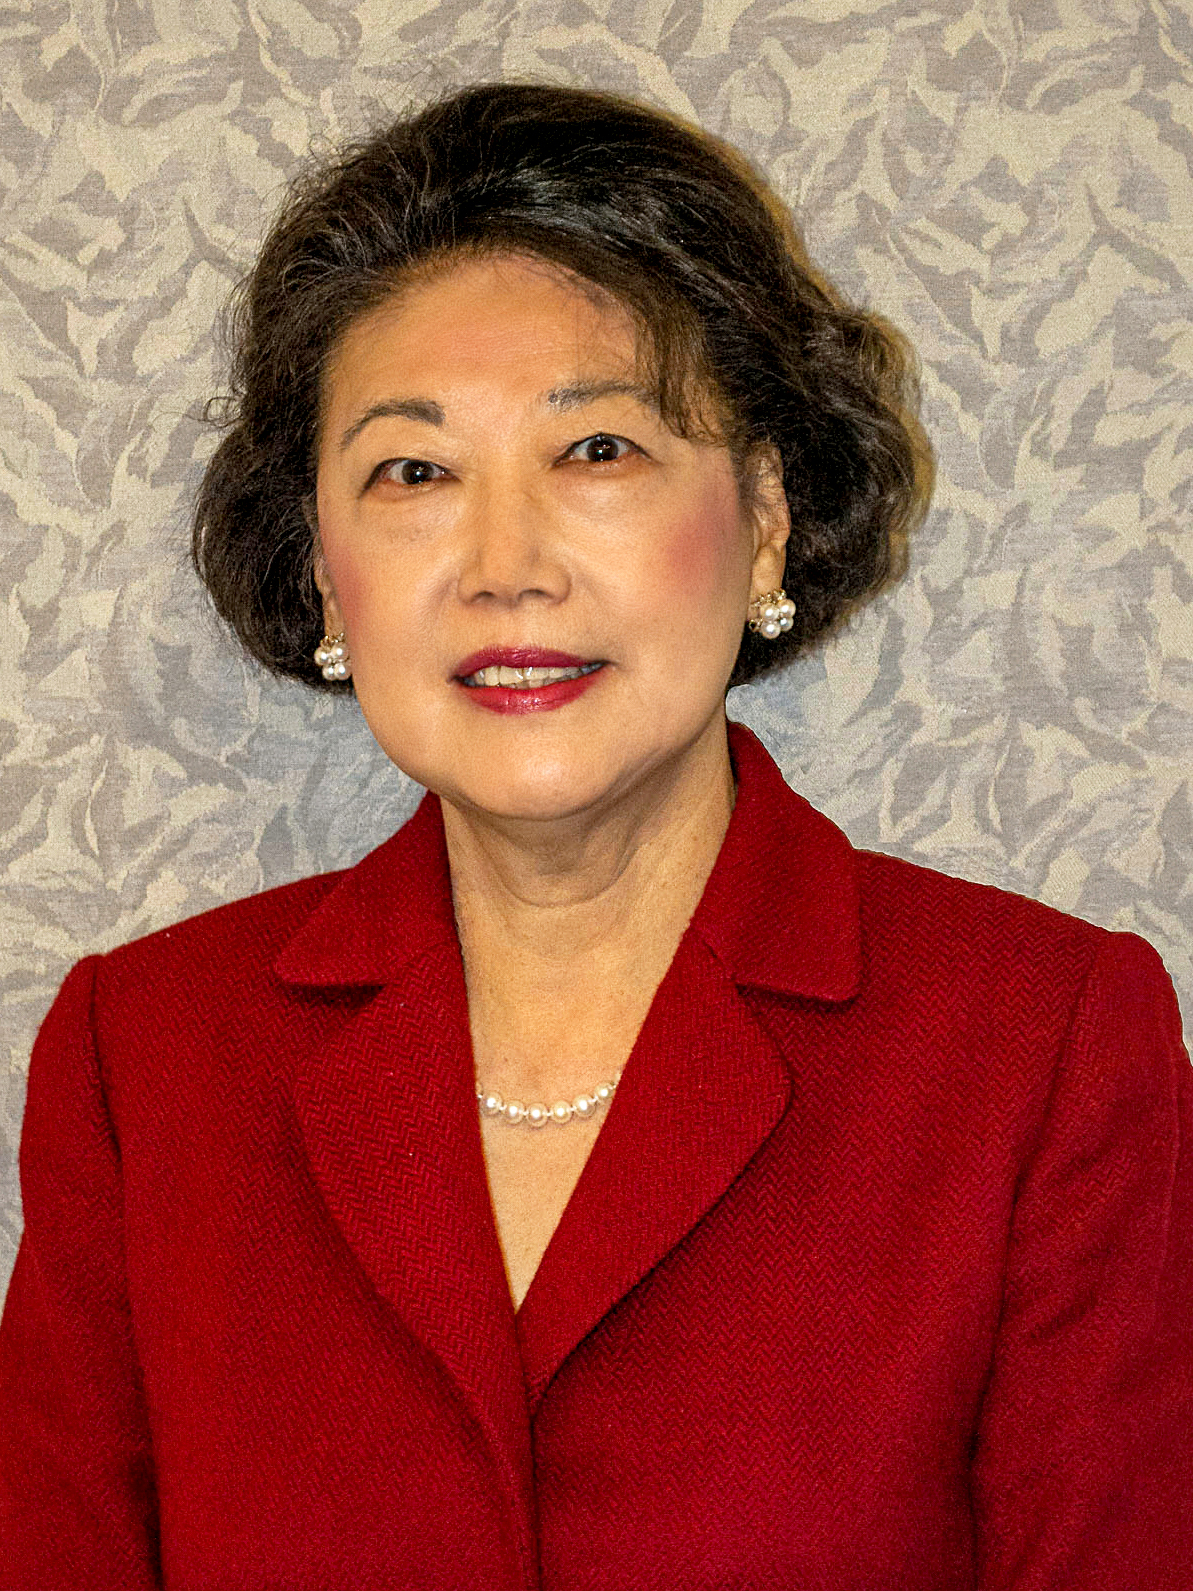 Elizabeth Tai, formerly of Poquoson Public Library, has been chosen for a 2021 Honorary Life Membership